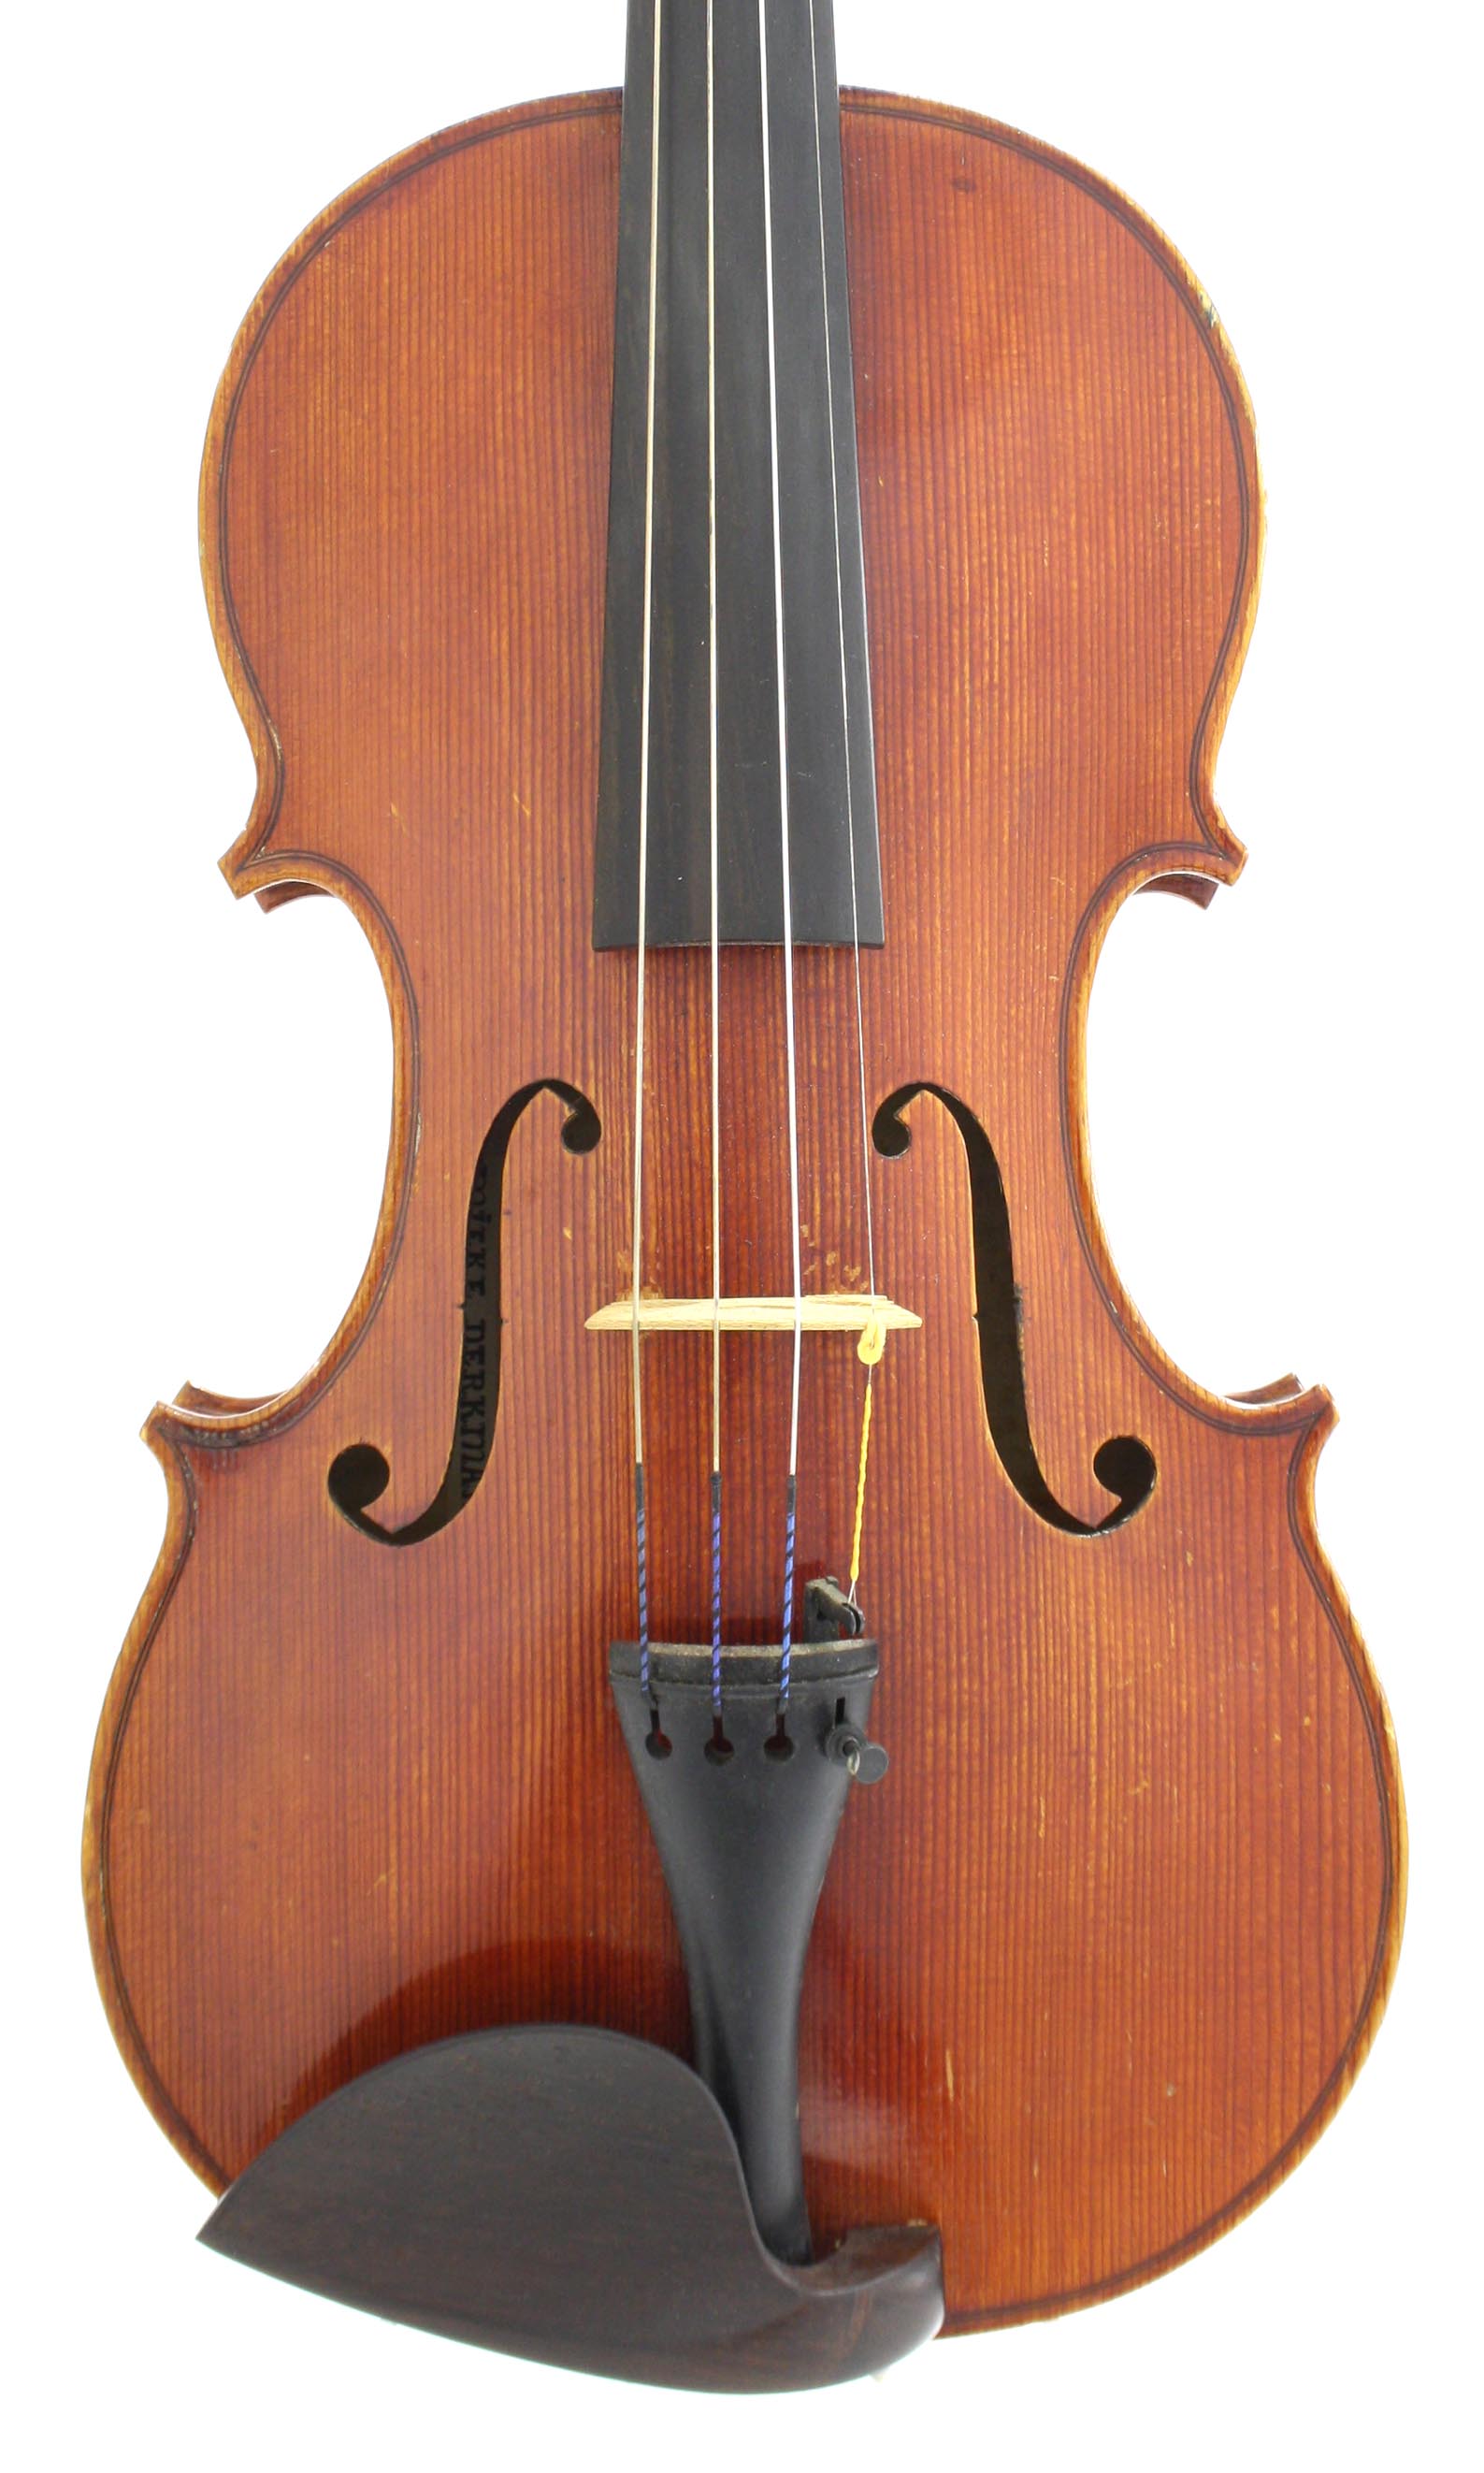 Violin by and labelled Mieke Derkman, 14 1/8", 35.90cm